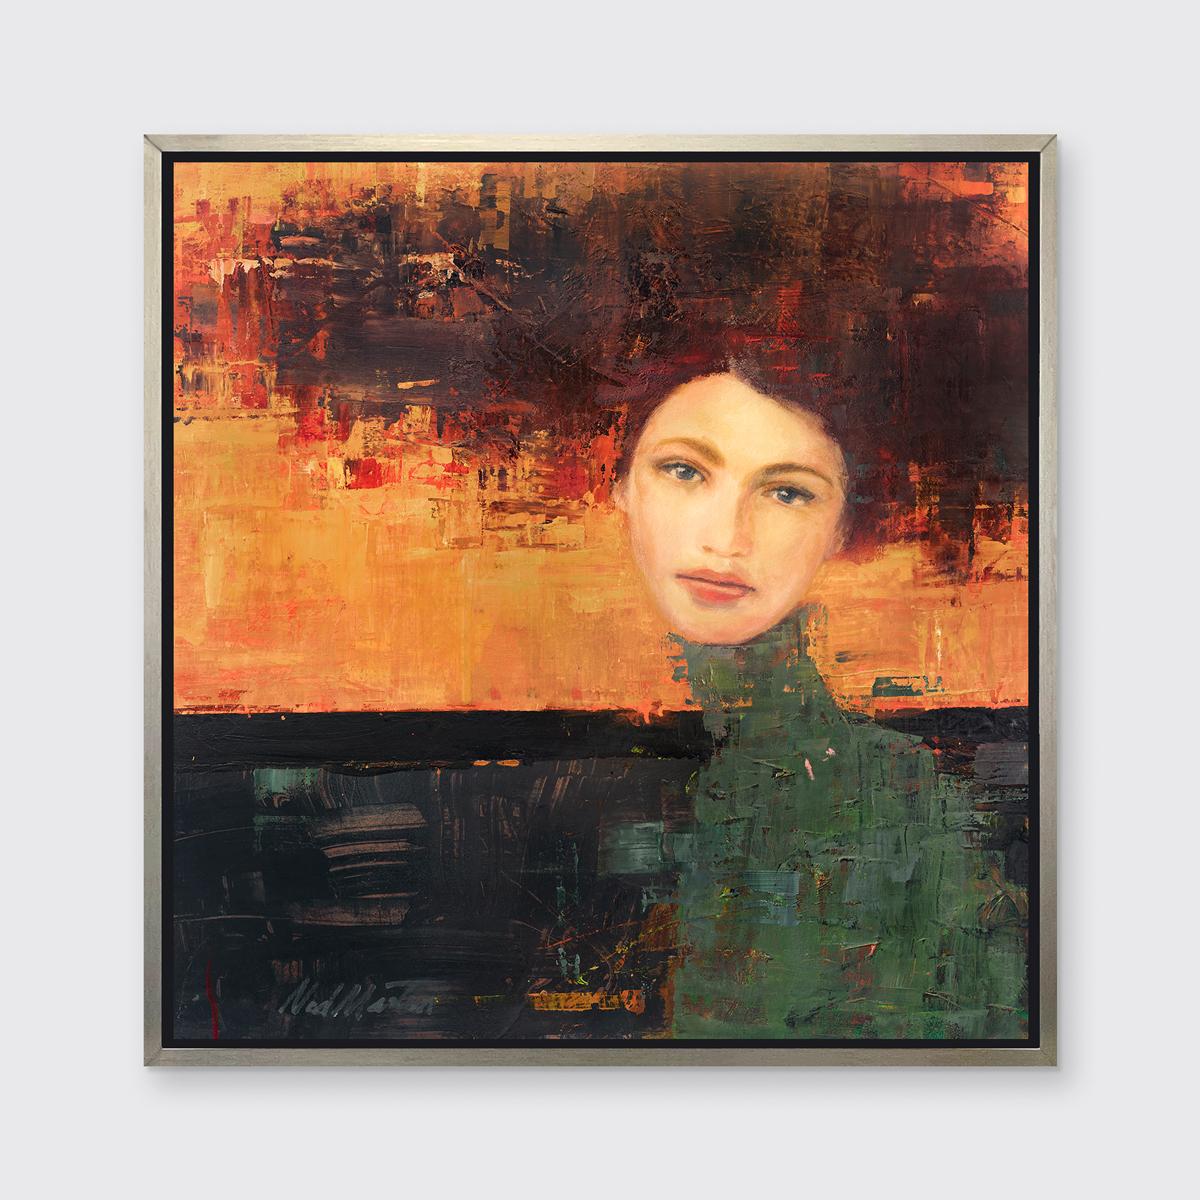 This abstract portrait limited edition print by Ned Martin is part of the artist's Spirits Through Time series. It features a woman's face rendered realistically, with her neck and shoulders and hair abstracted. Her hair fades out to become